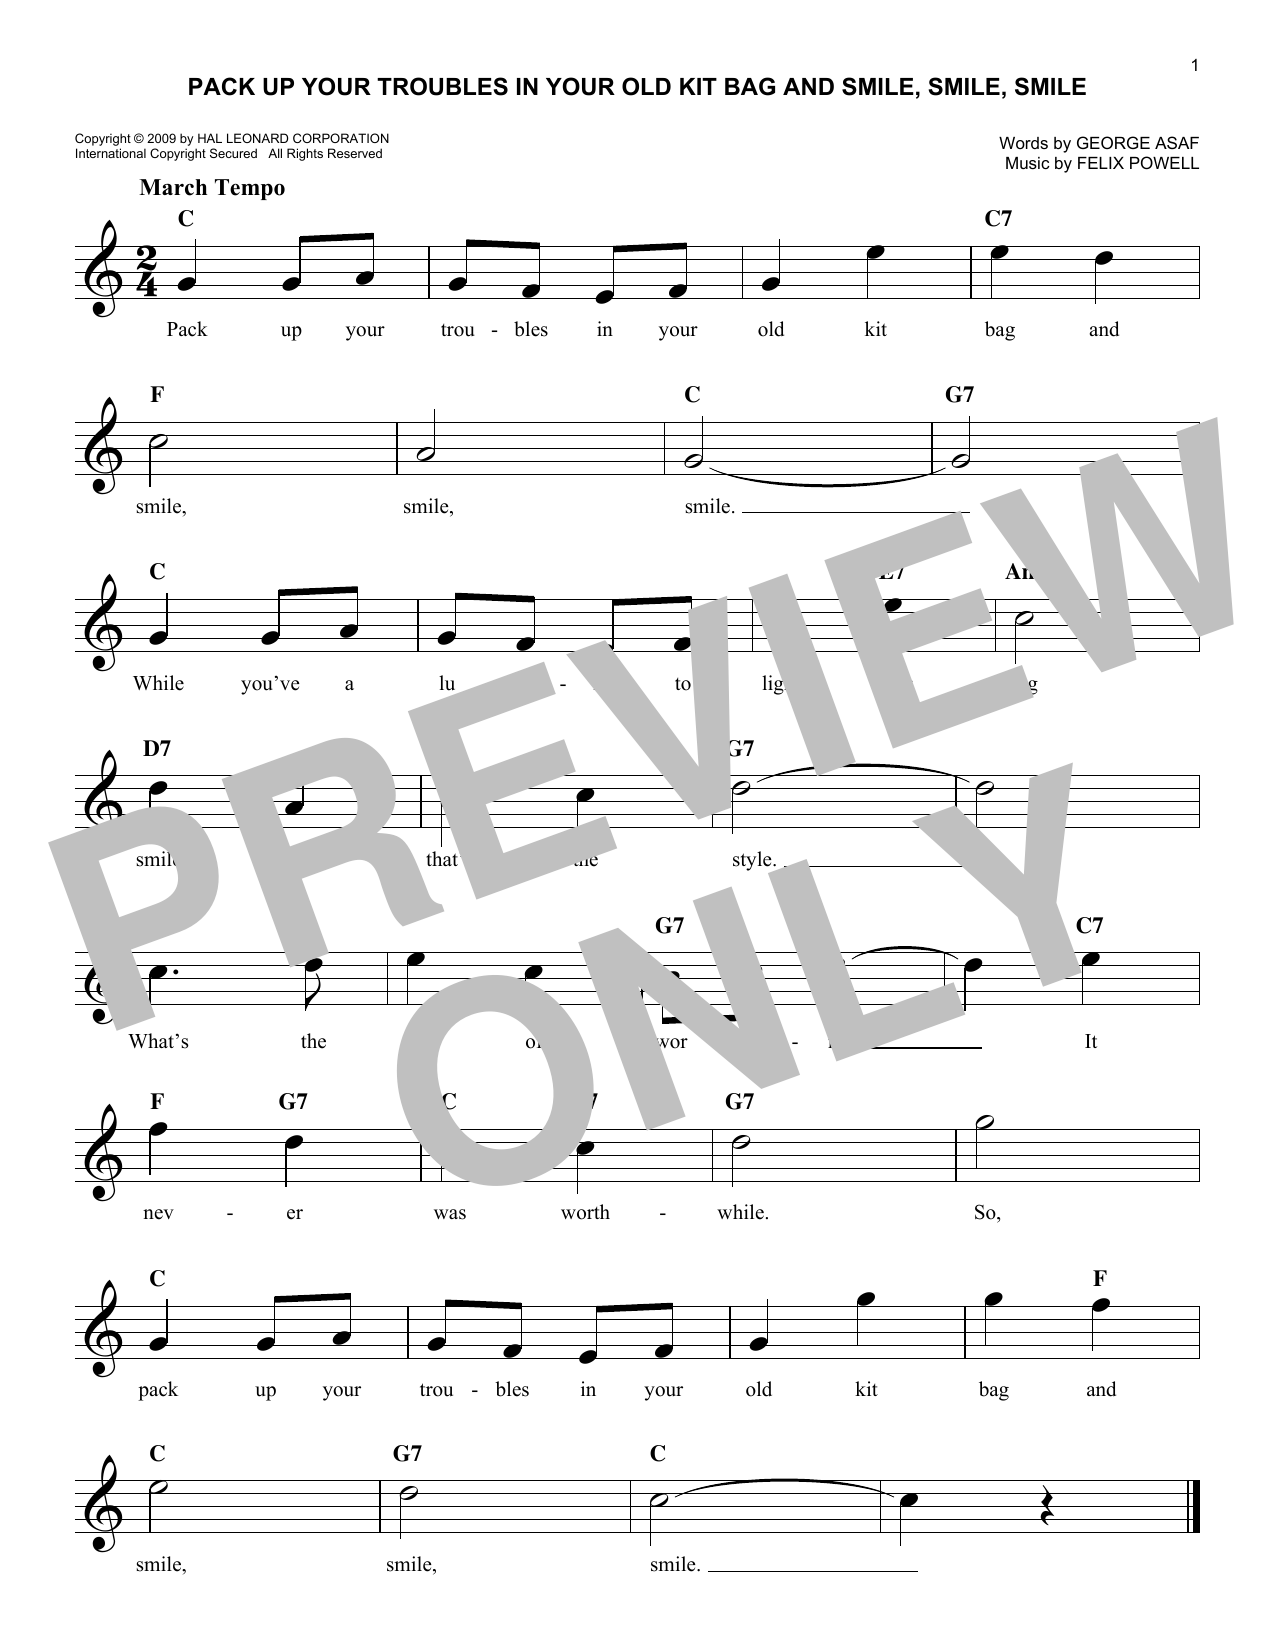 Felix Powell Pack Up Your Troubles In Your Old Kit Bag And Smile, Smile, Smile sheet music notes printable PDF score